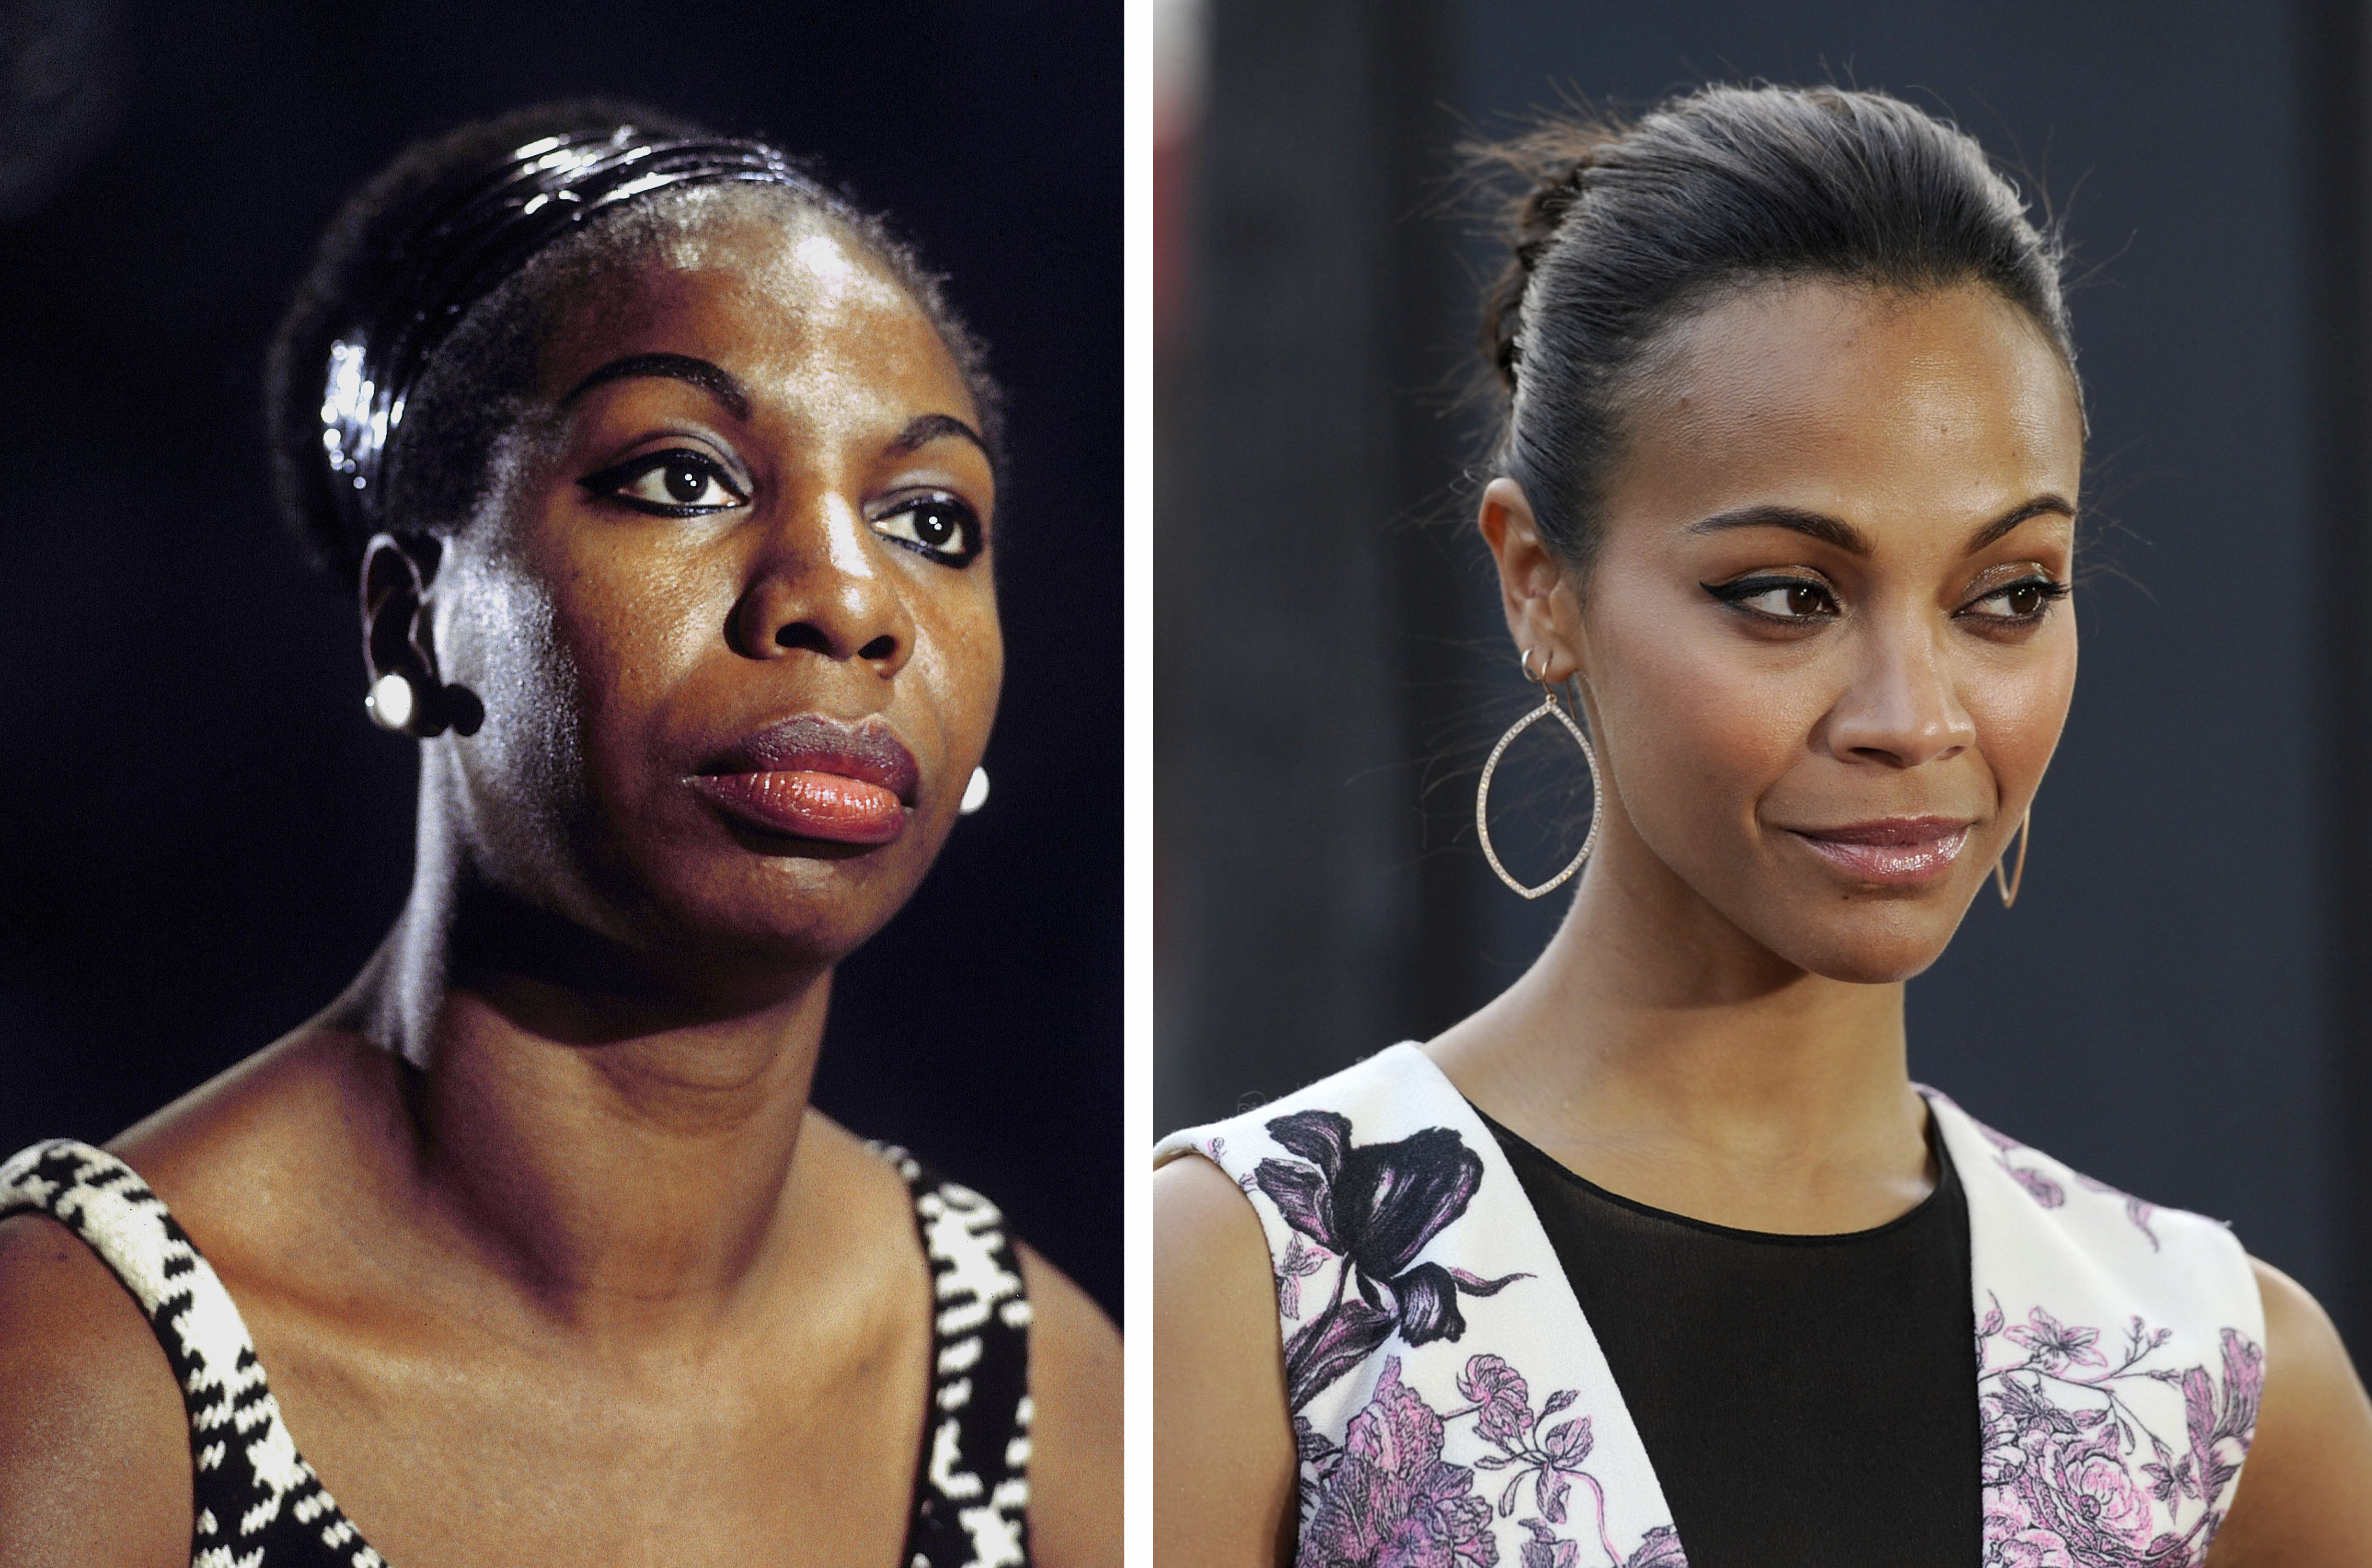 Actress Zoe Saldana (R) is playing late singer Nina Simone (L) in a movie by director Cynthia Mort. (David Redfern)